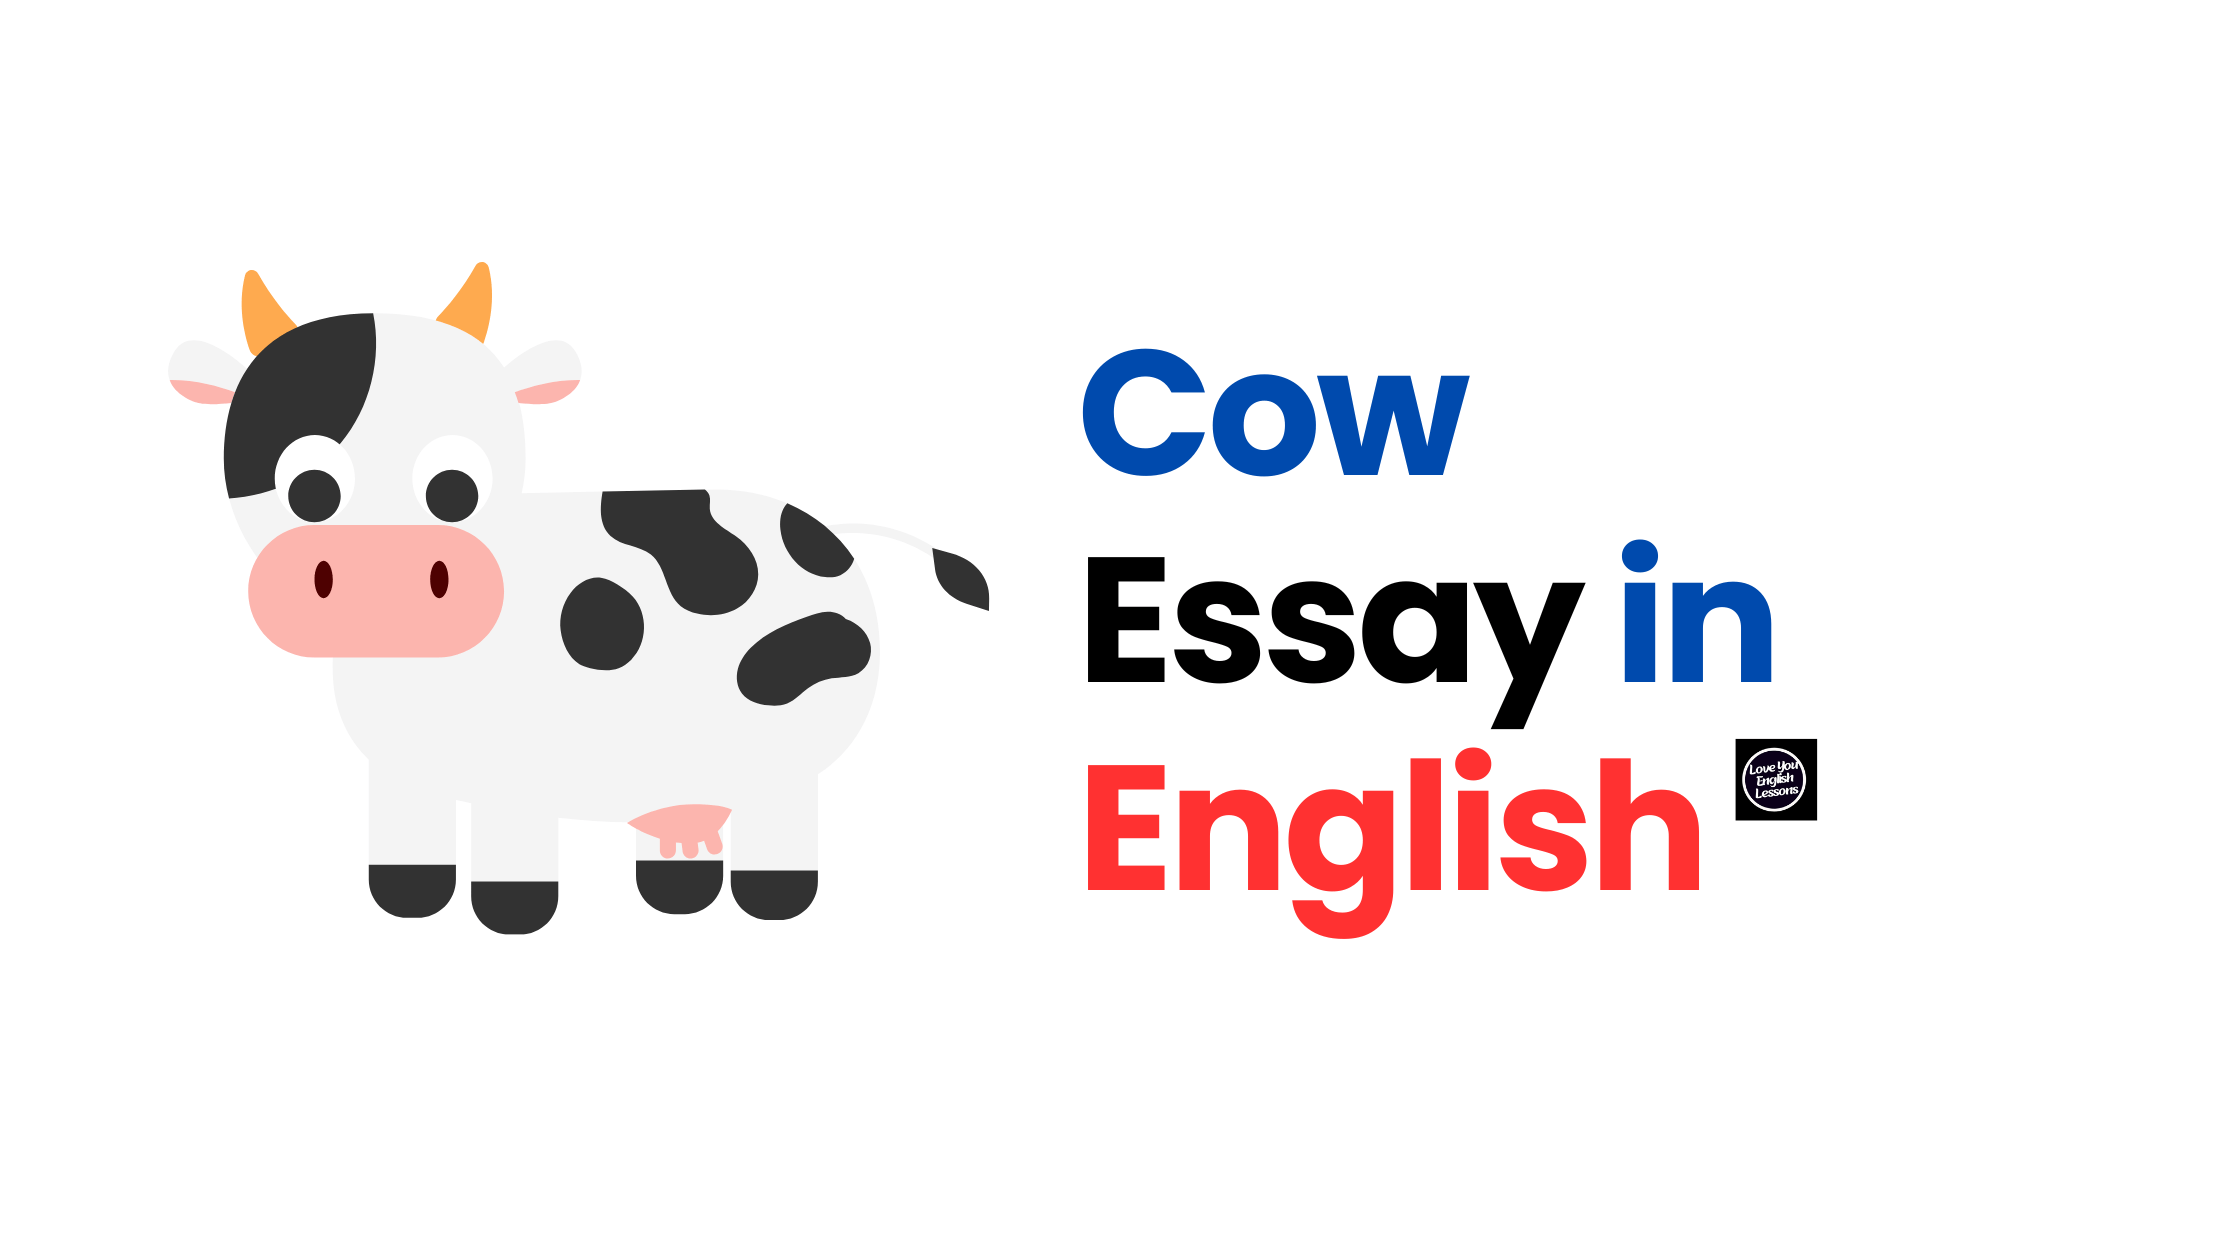 Essay about the cow in English